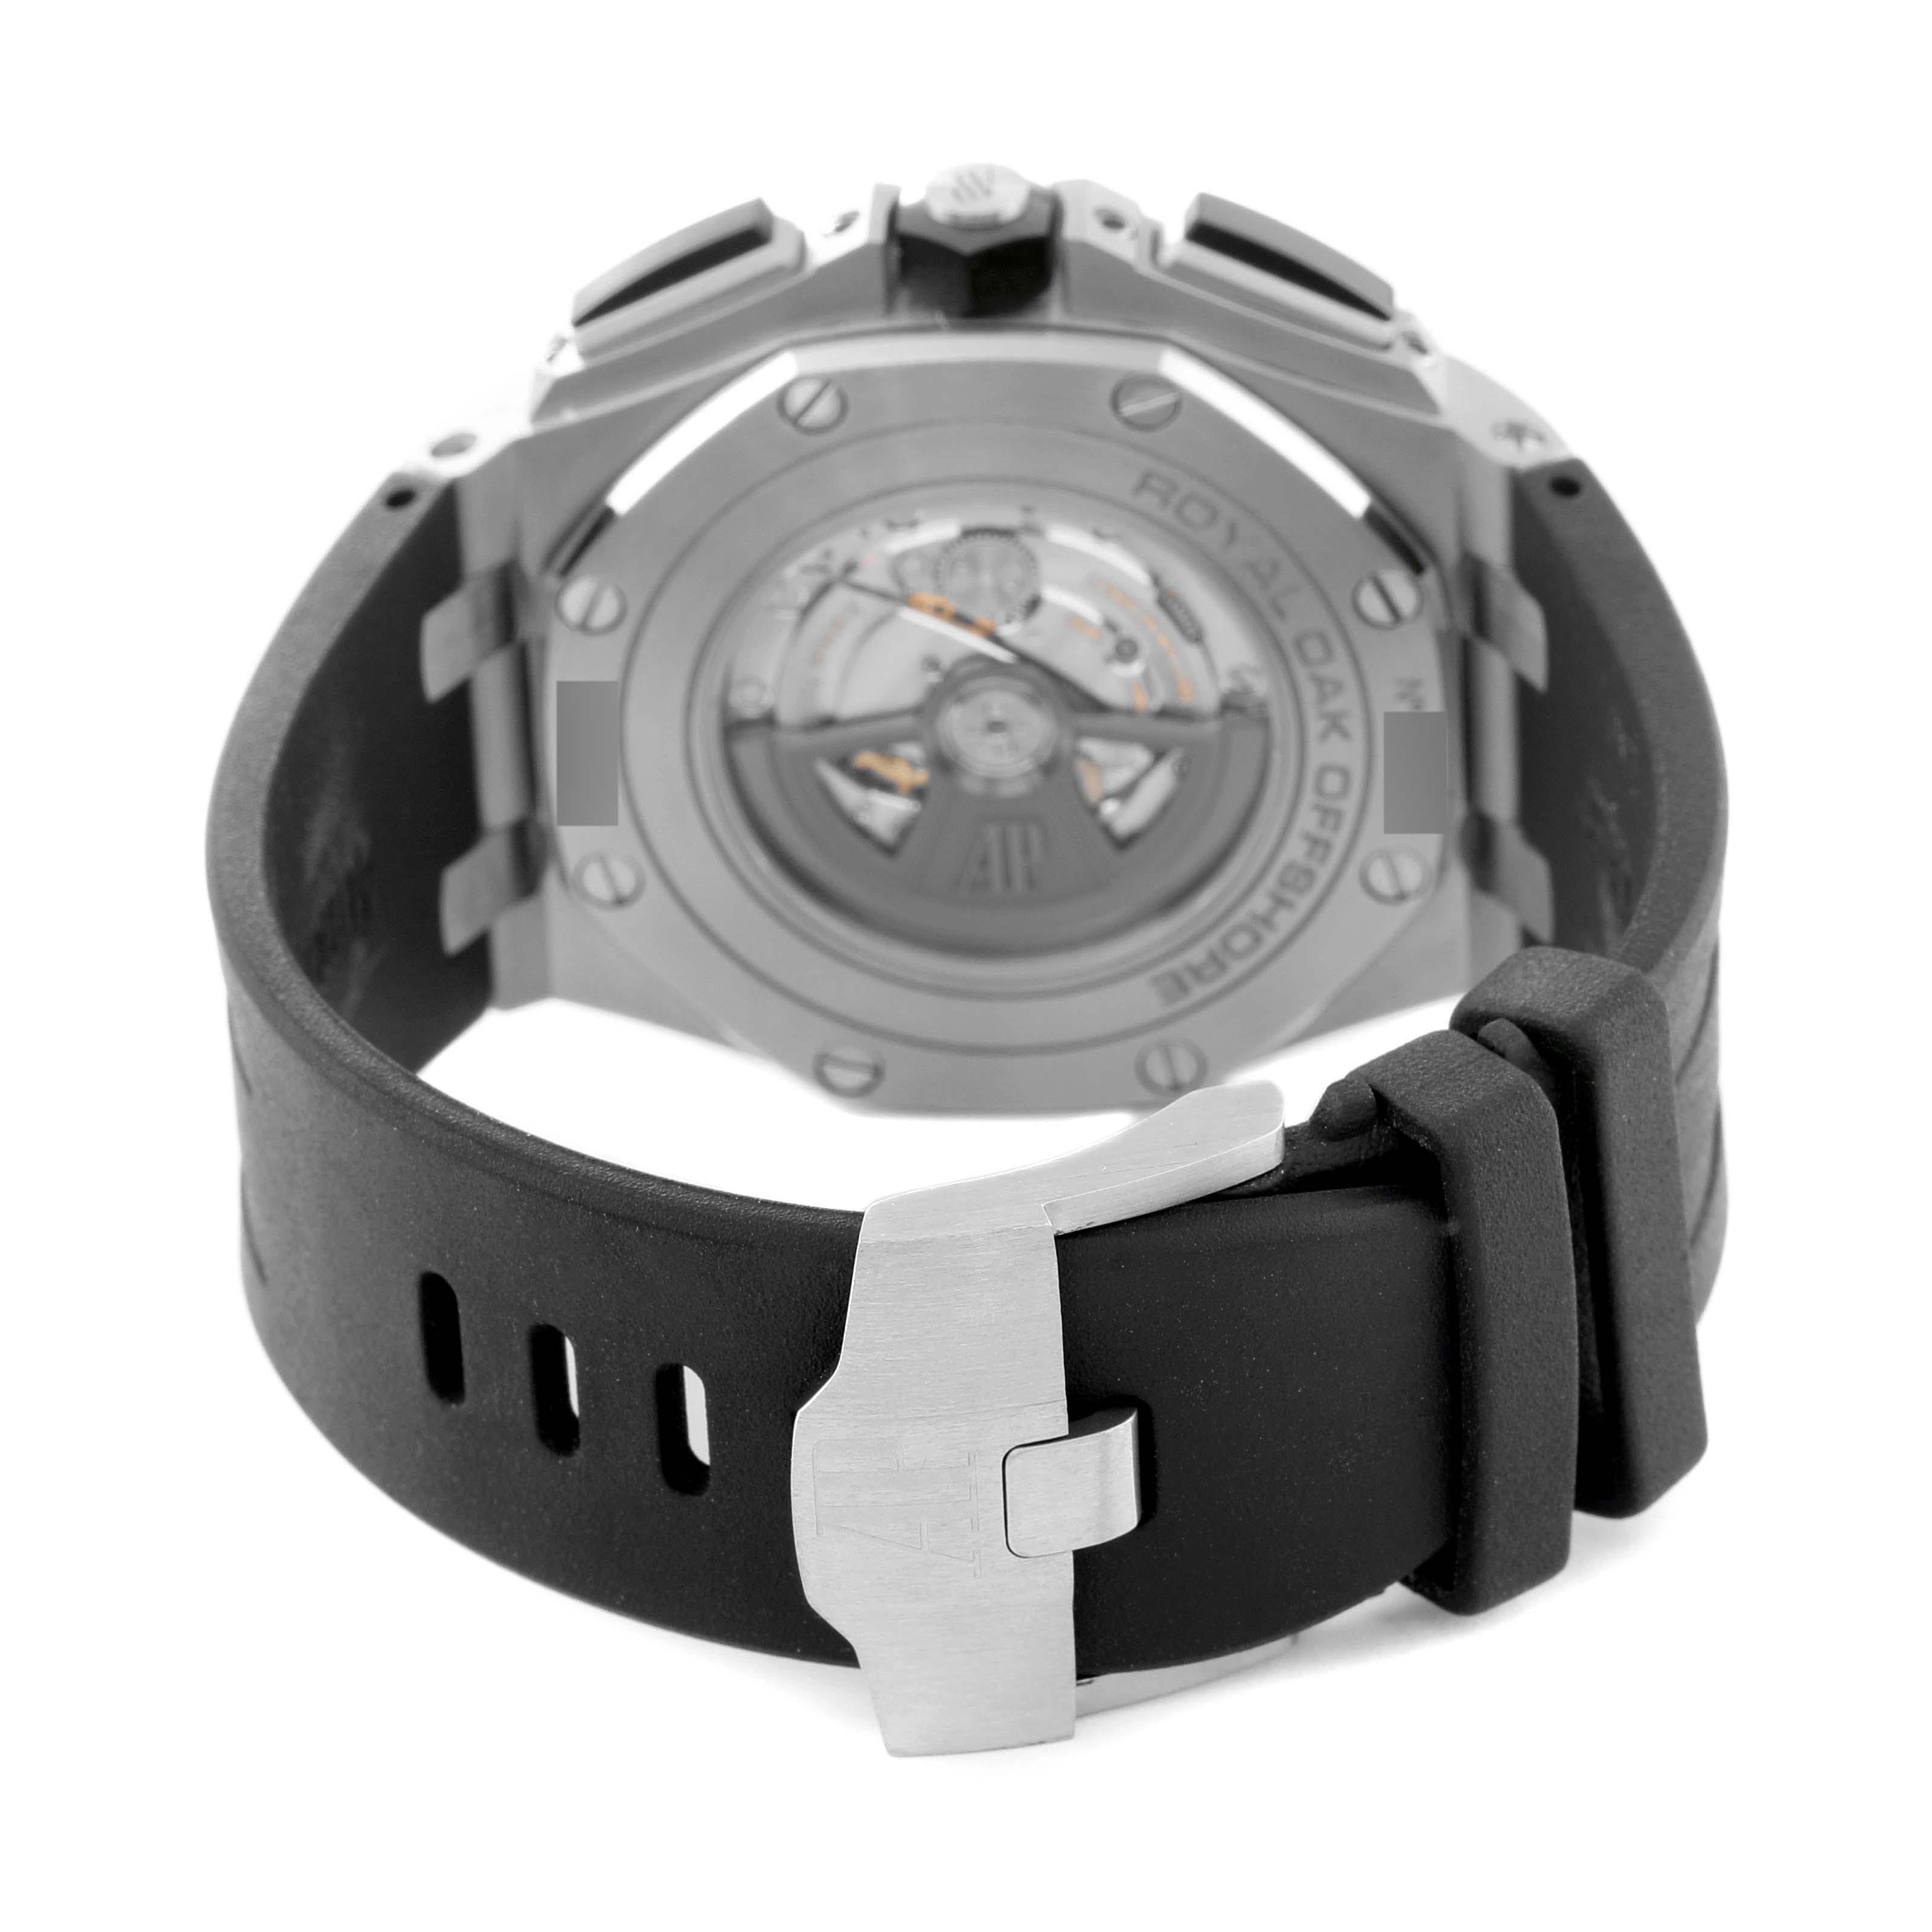 Audemars Piguet Royal Oak Offshore Steel Mens Watch 26400SO Box Papers. Automatic self-winding chronograph movement. Stainless steel octagonal case 44 mm in diameter. Exhibition sapphire crystal caseback. Black ceramic crown with a brushed stainless